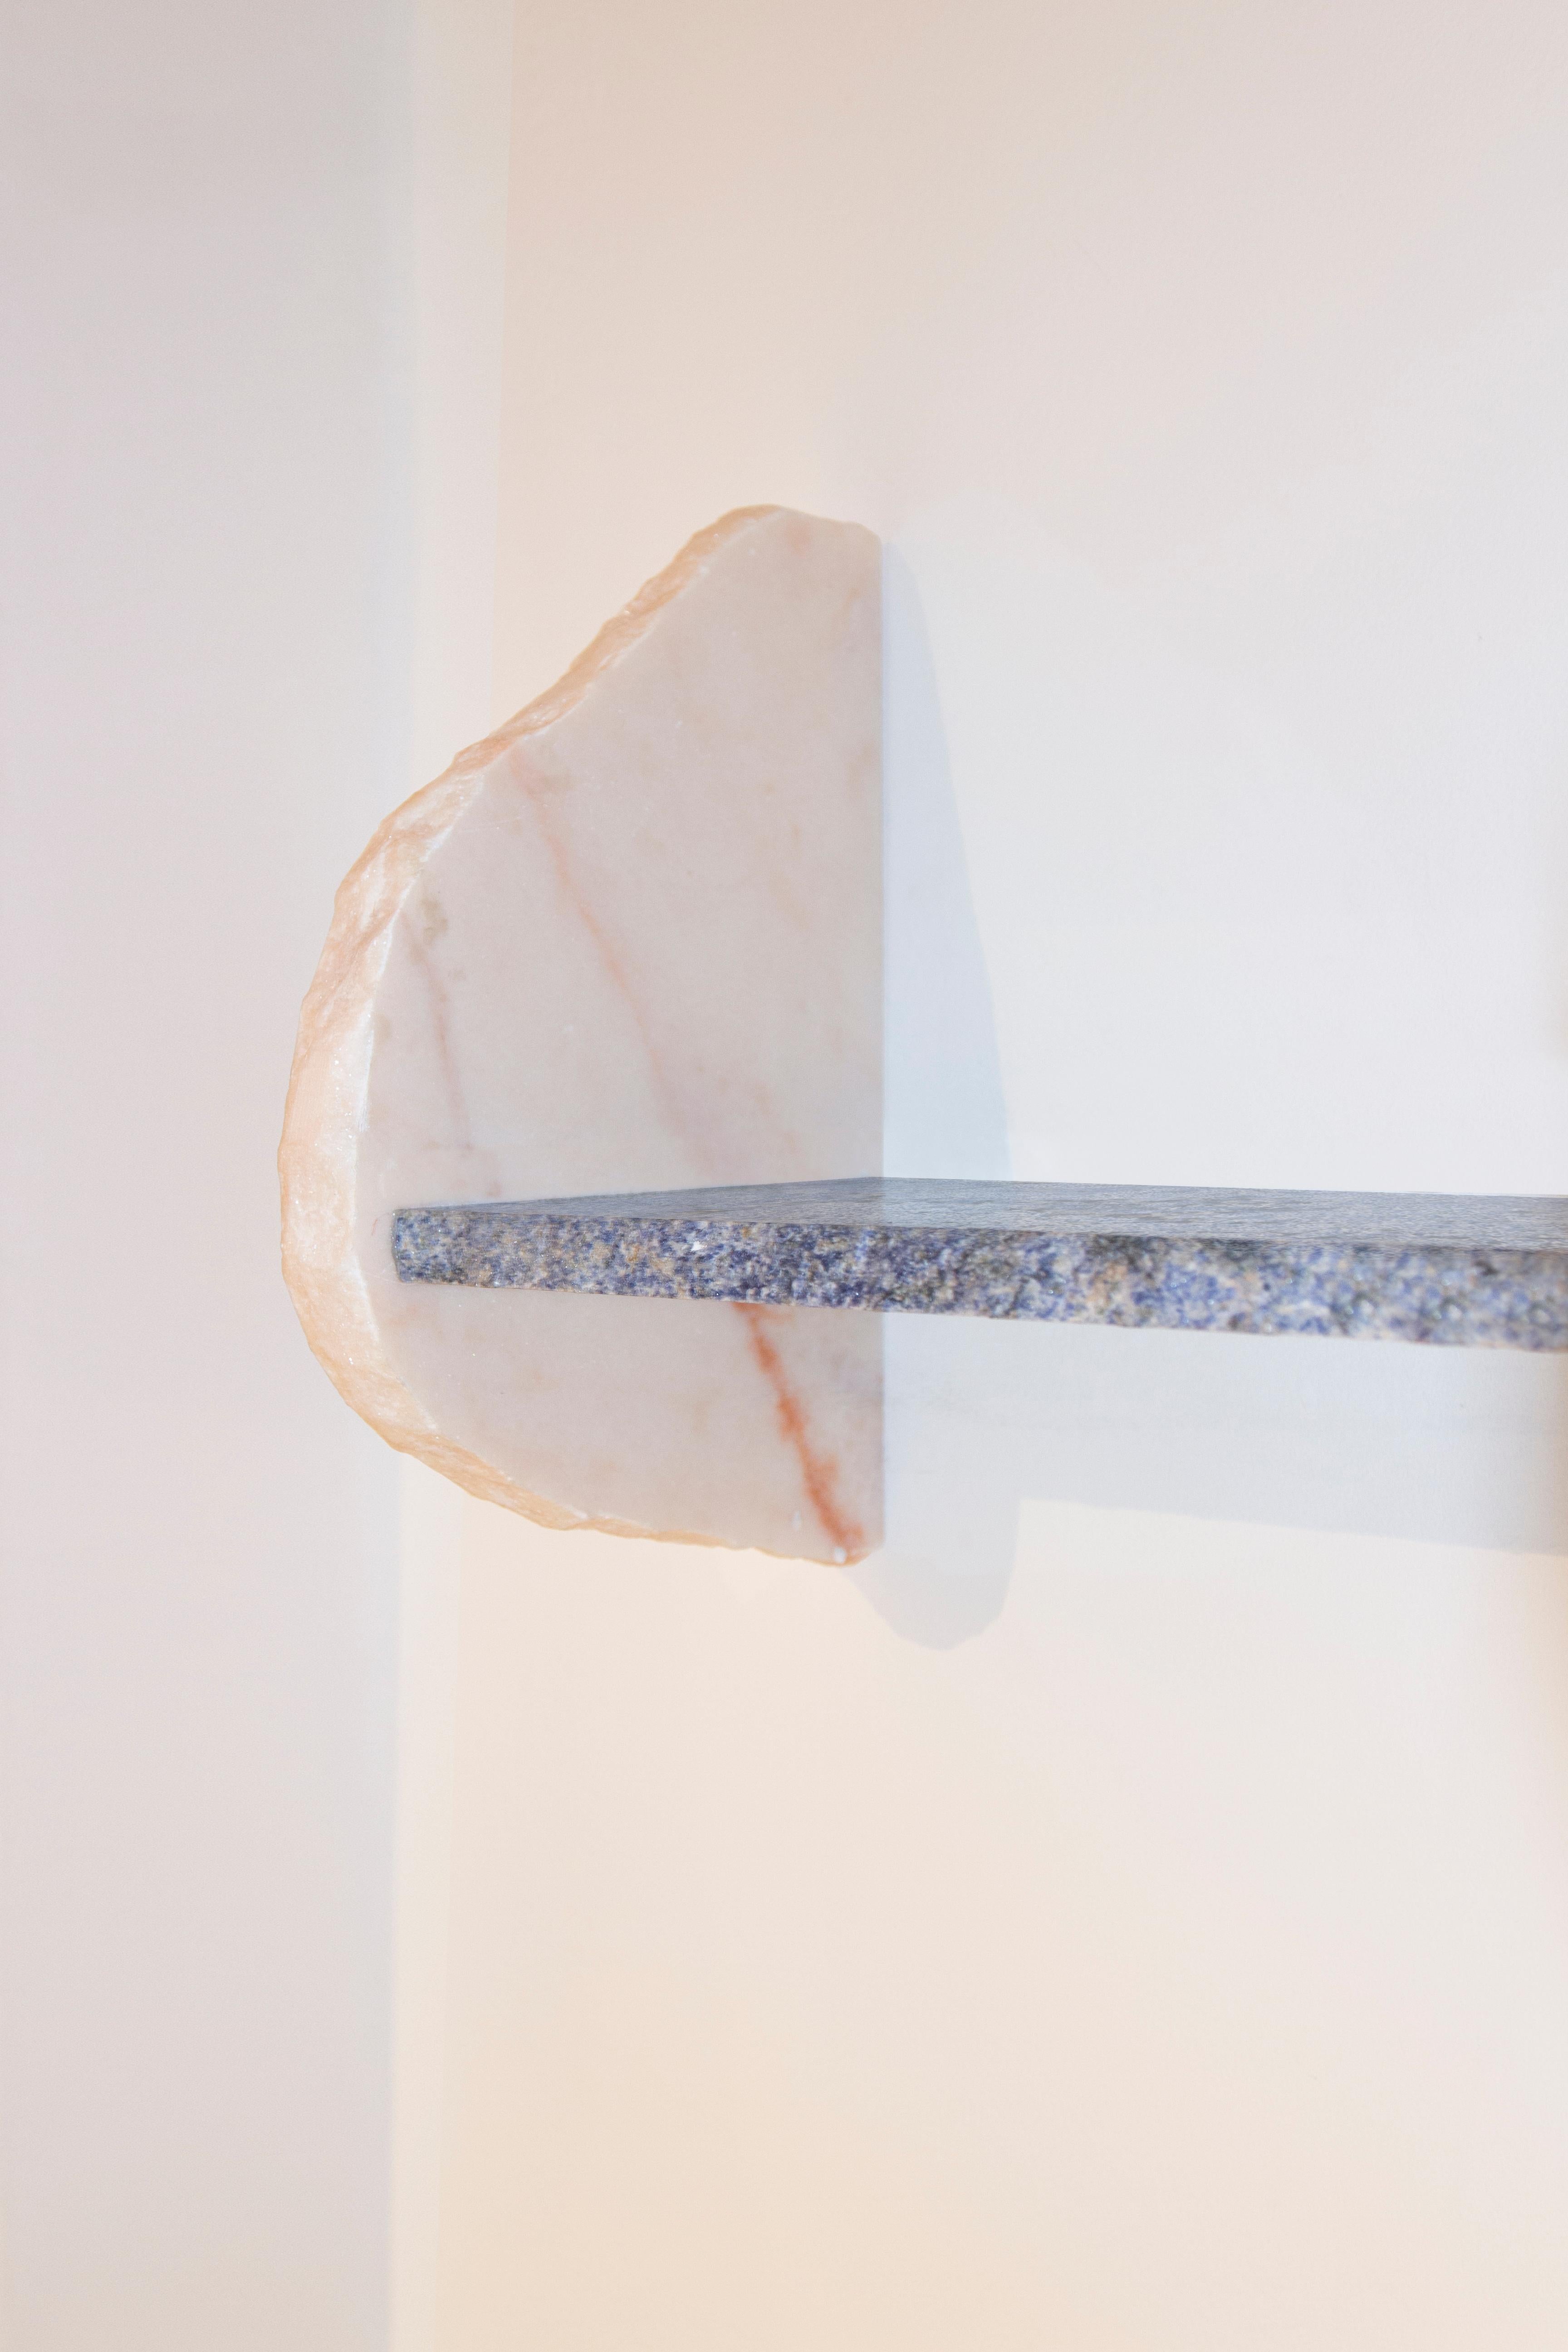 21st Century Contemporary Mixed Marble Shelf Handmade Italy by Ilaria Bianchi For Sale 5